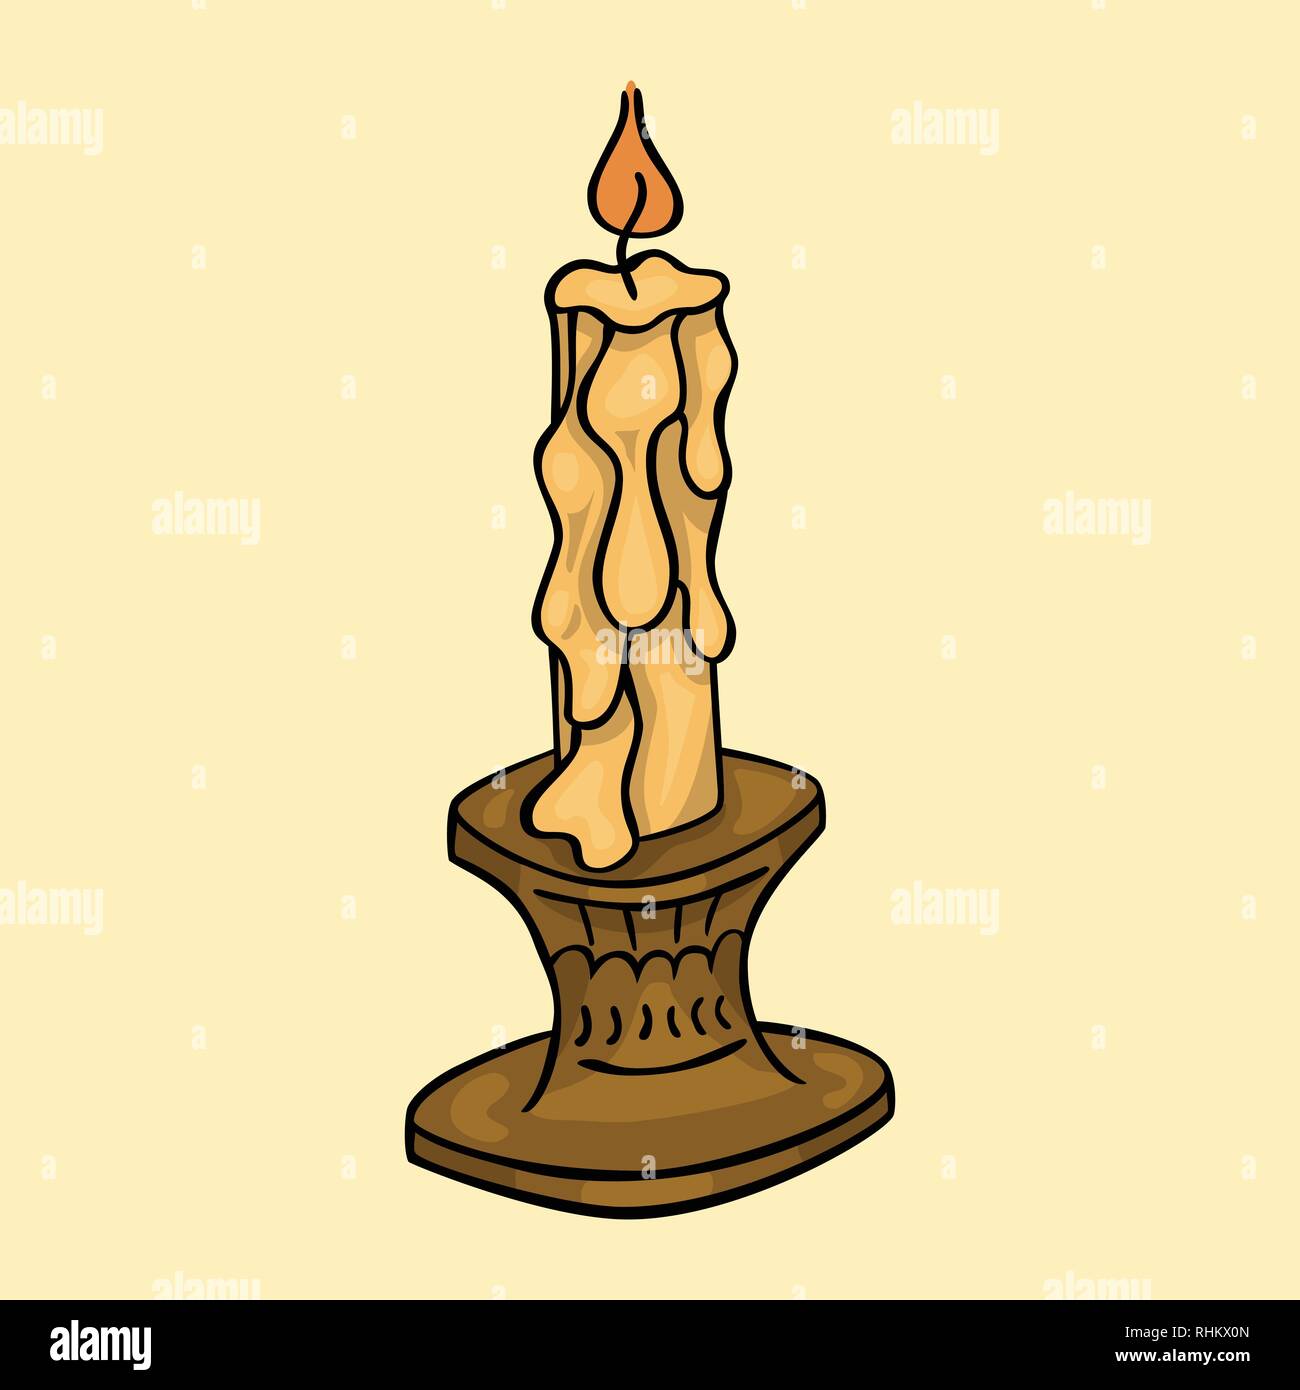 Burning Candle Pictures  Download Free Images on Unsplash